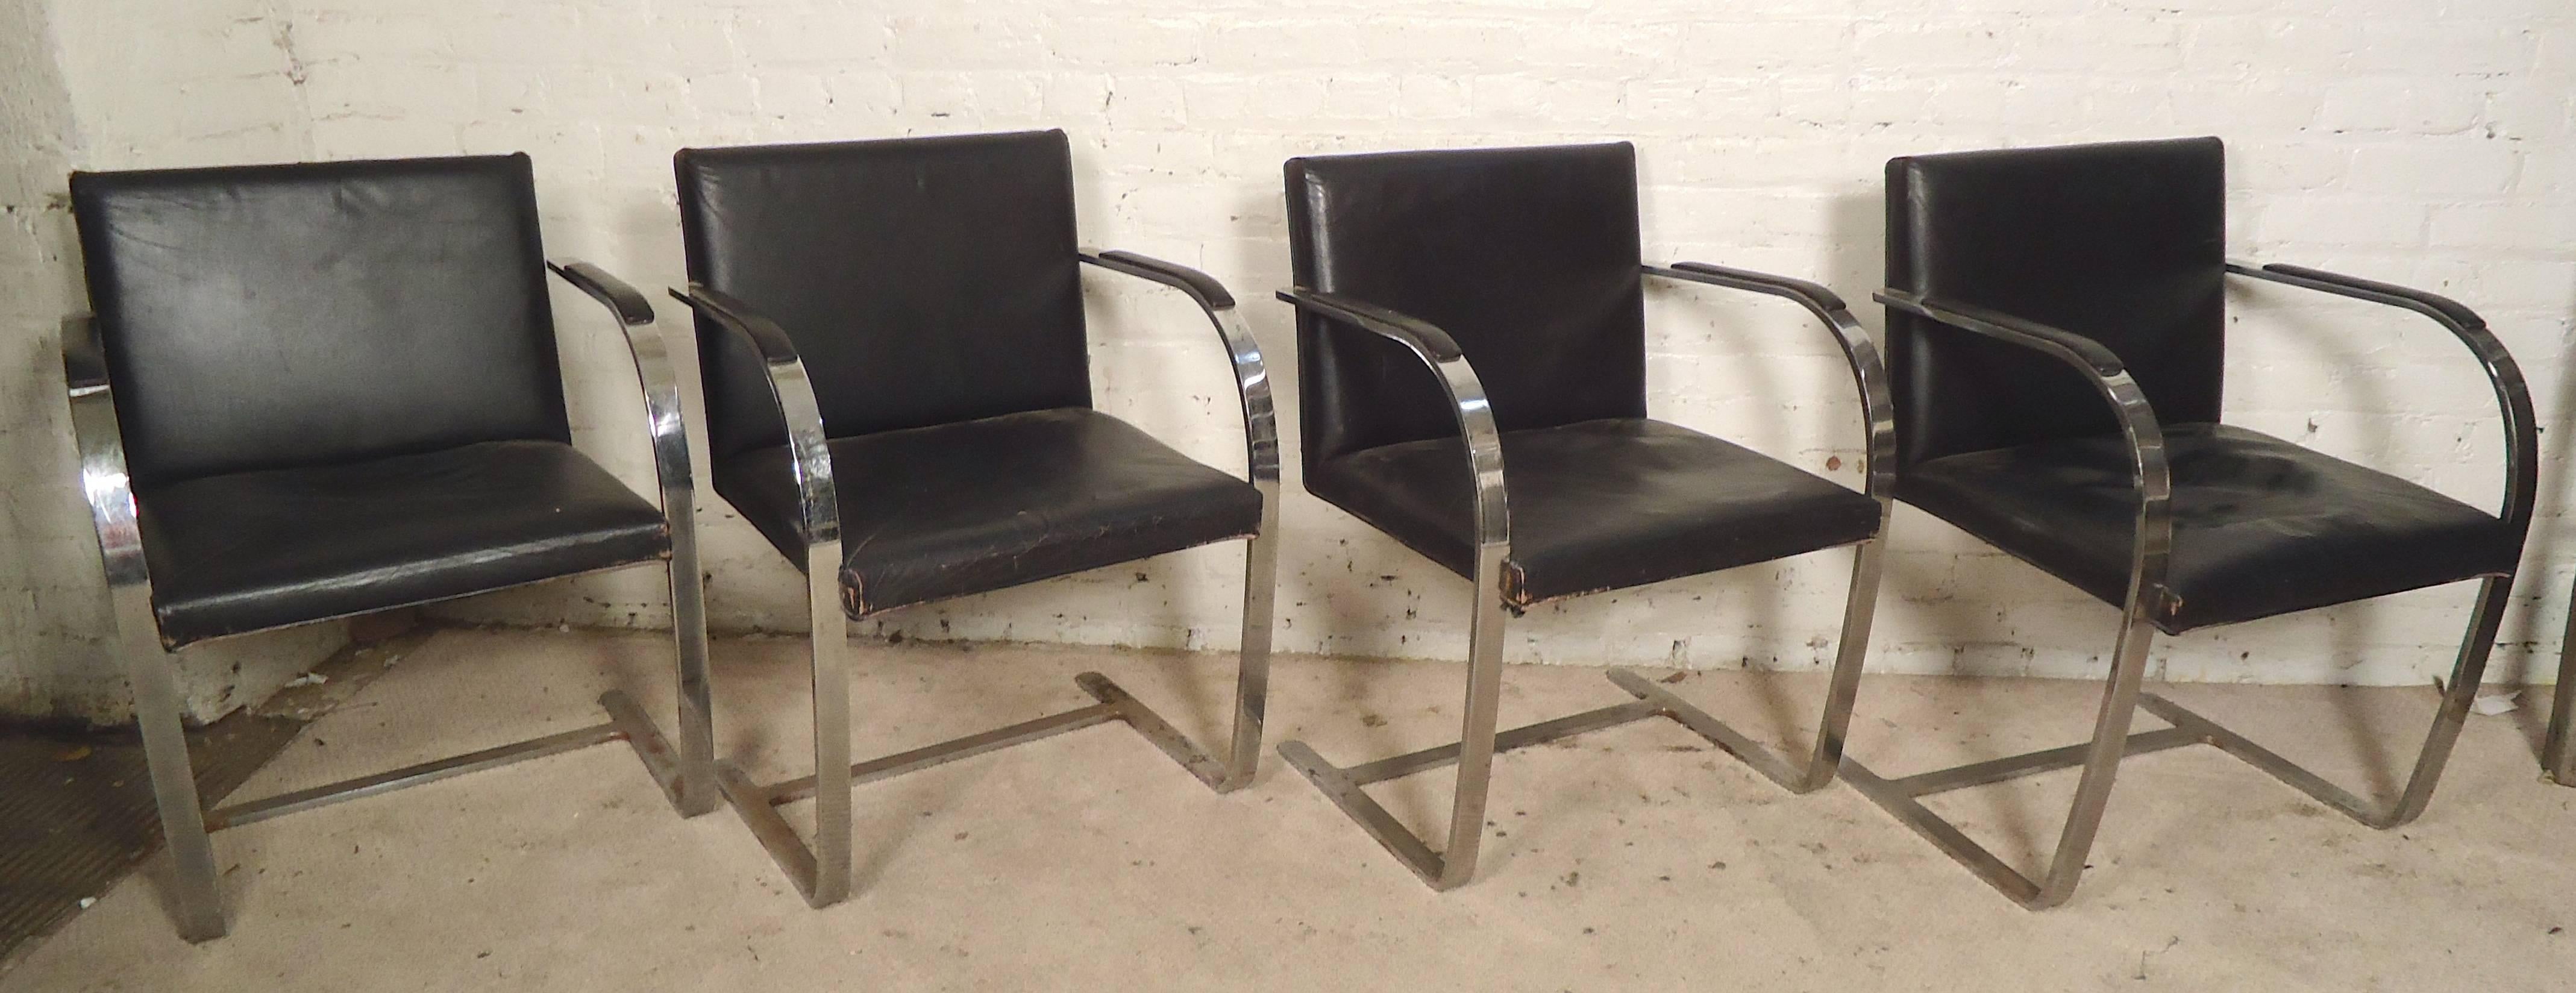 Ludwig Mies van der Rohe designed chrome-plated armchairs for Knoll. Great modern form with continuous arm to leg design. Heavy weight, comfortable 